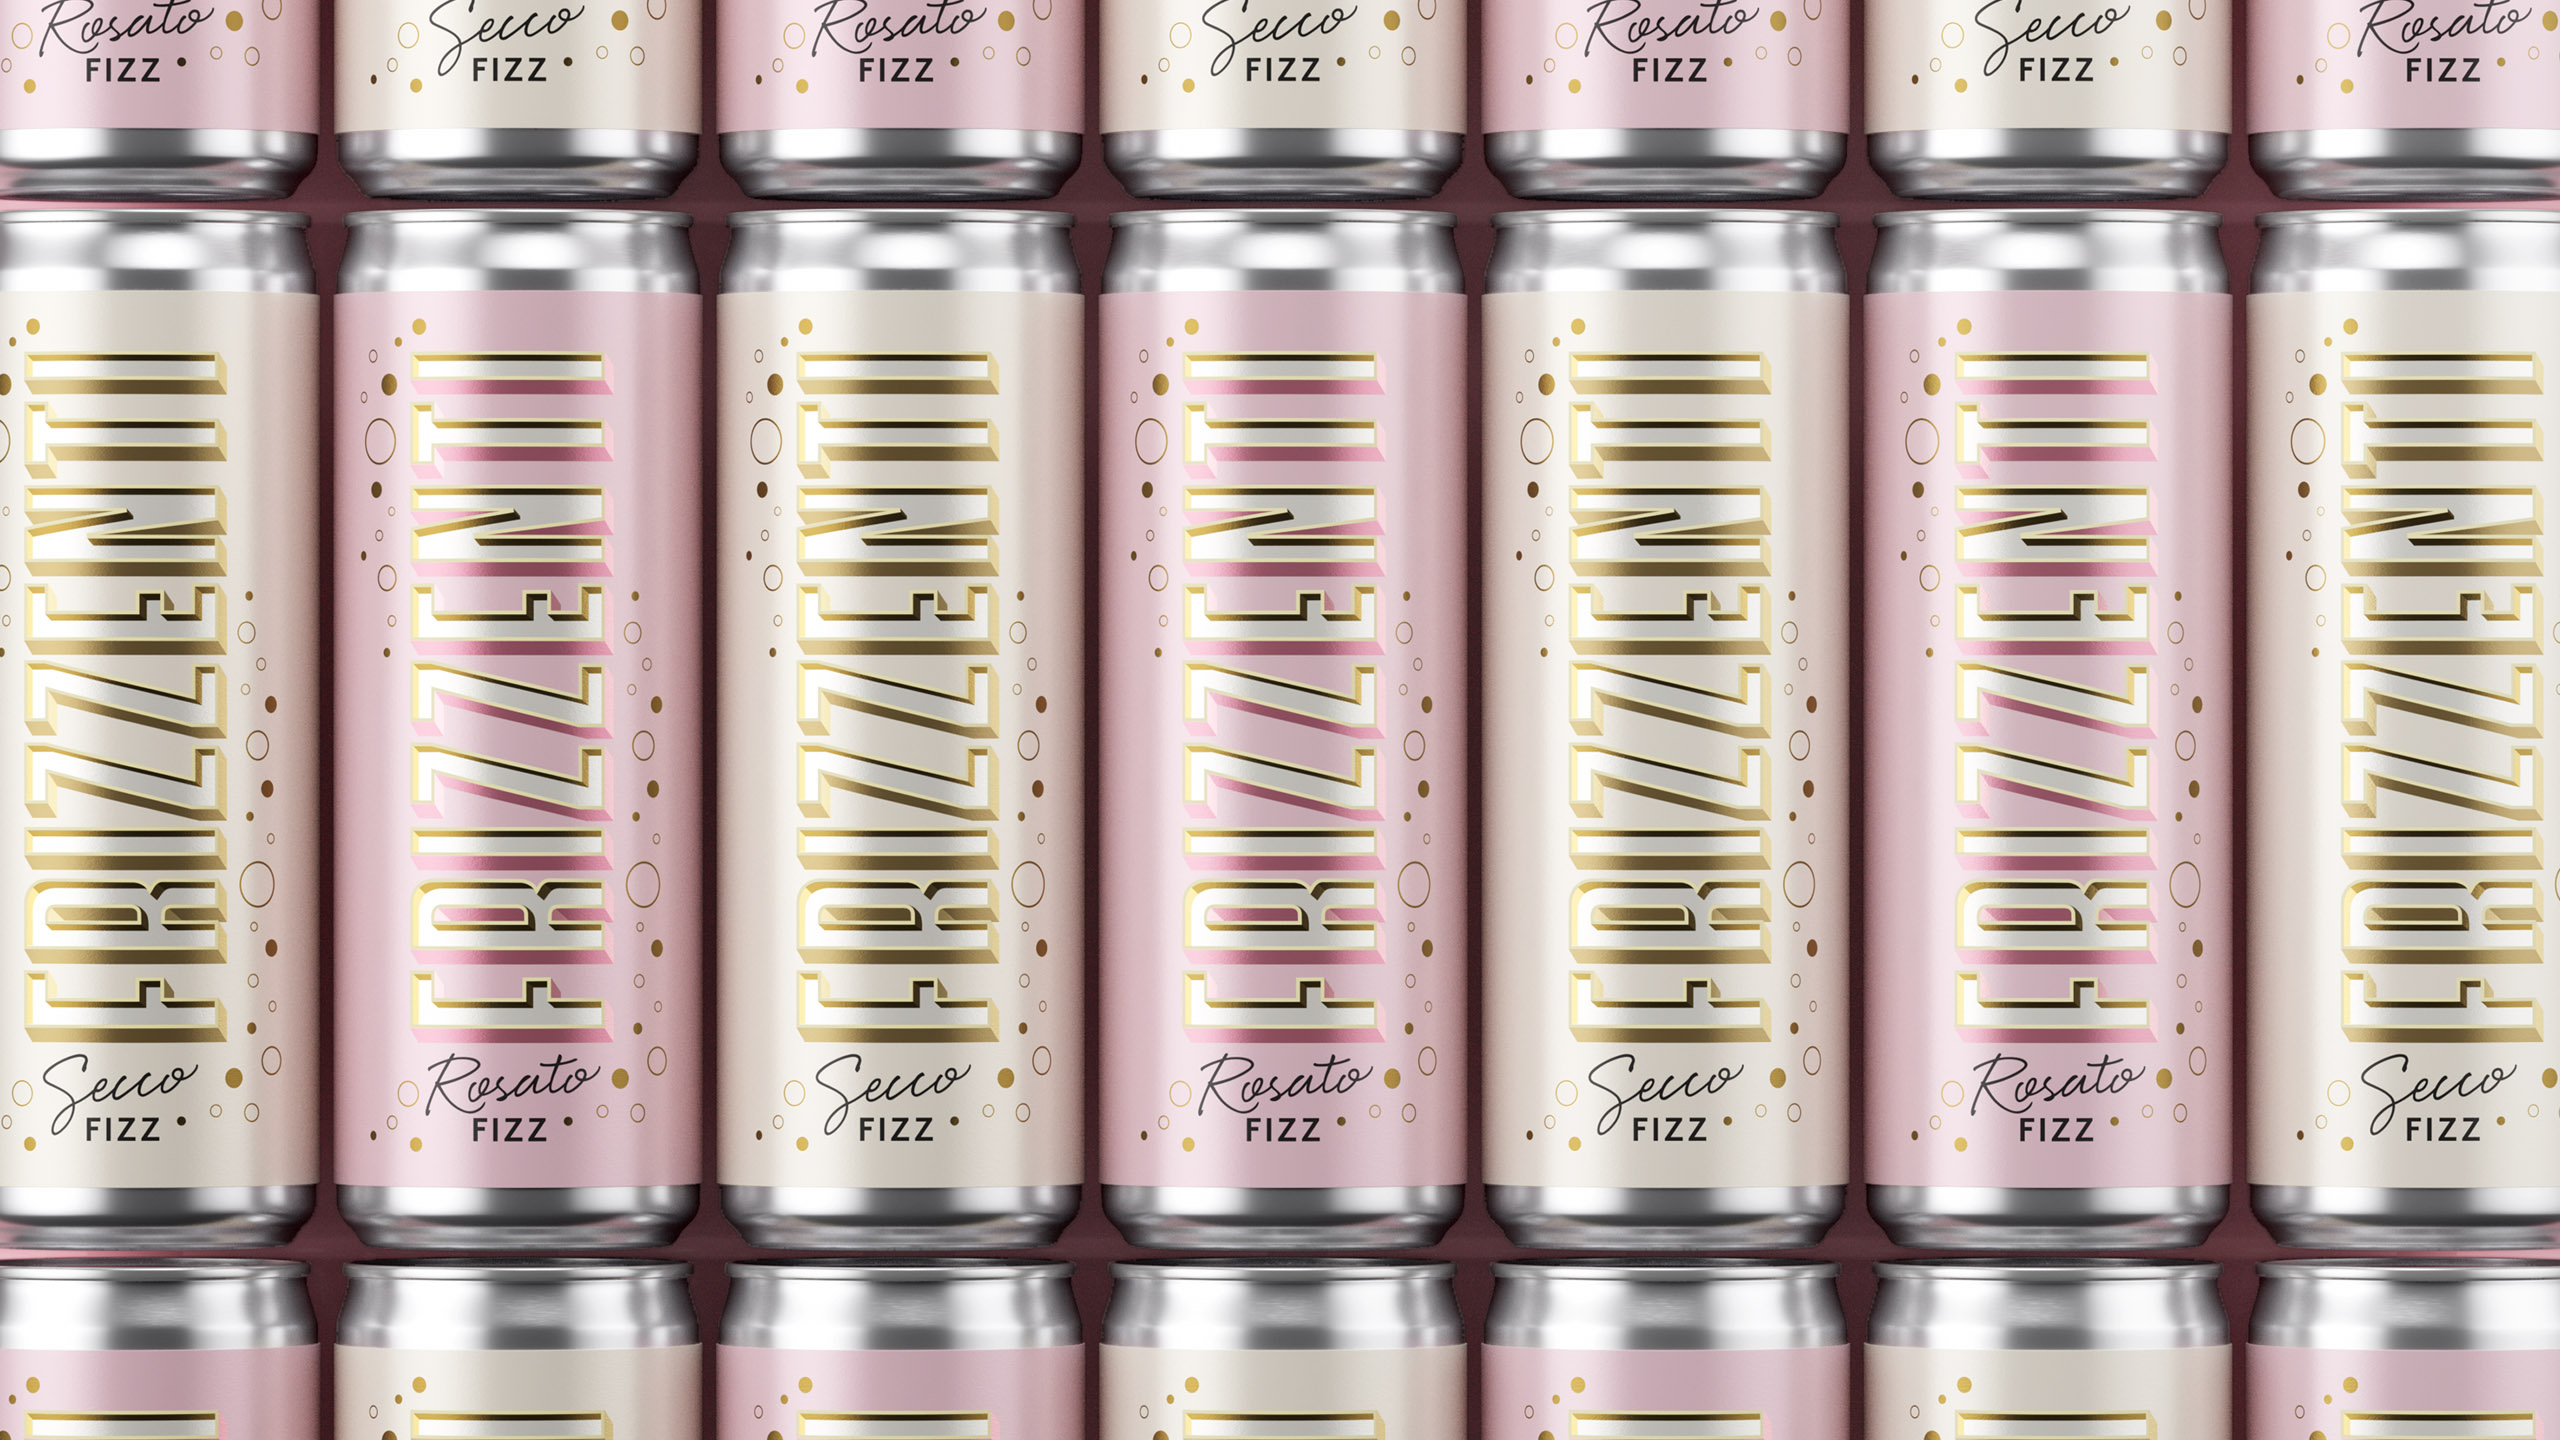 Frizzenti’s New Canned Prosecco Is Set To Sparkle With Identity And Packaging By Popp Studio